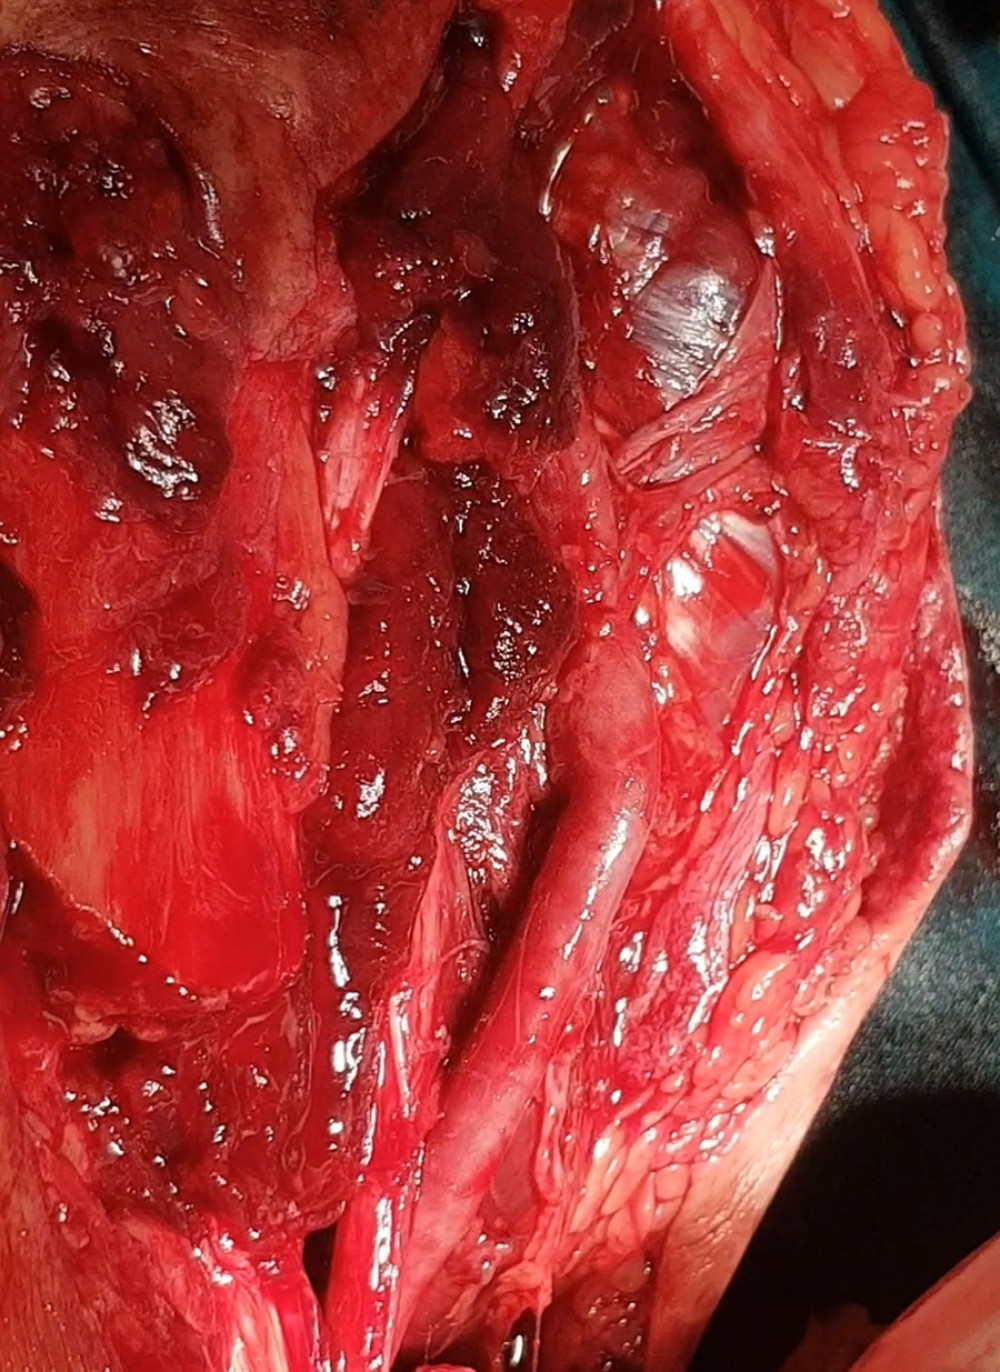 End-to-end bypass anastomosis of the posterior tibial artery using a 10-cm graft from the major saphenous vein of the ipsilateral thigh.